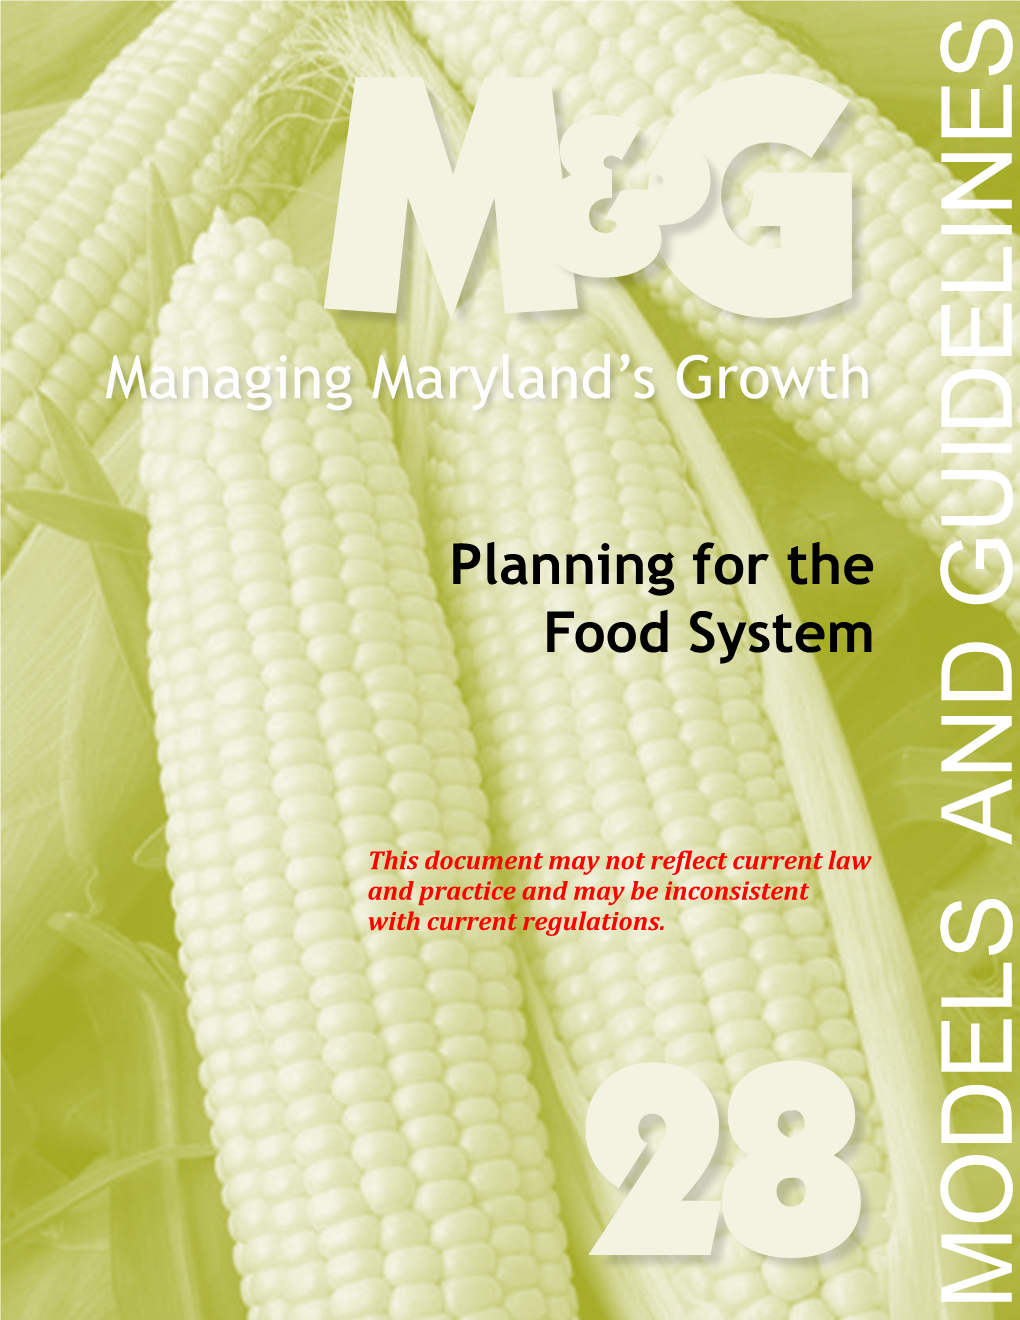 Planning for the Food System